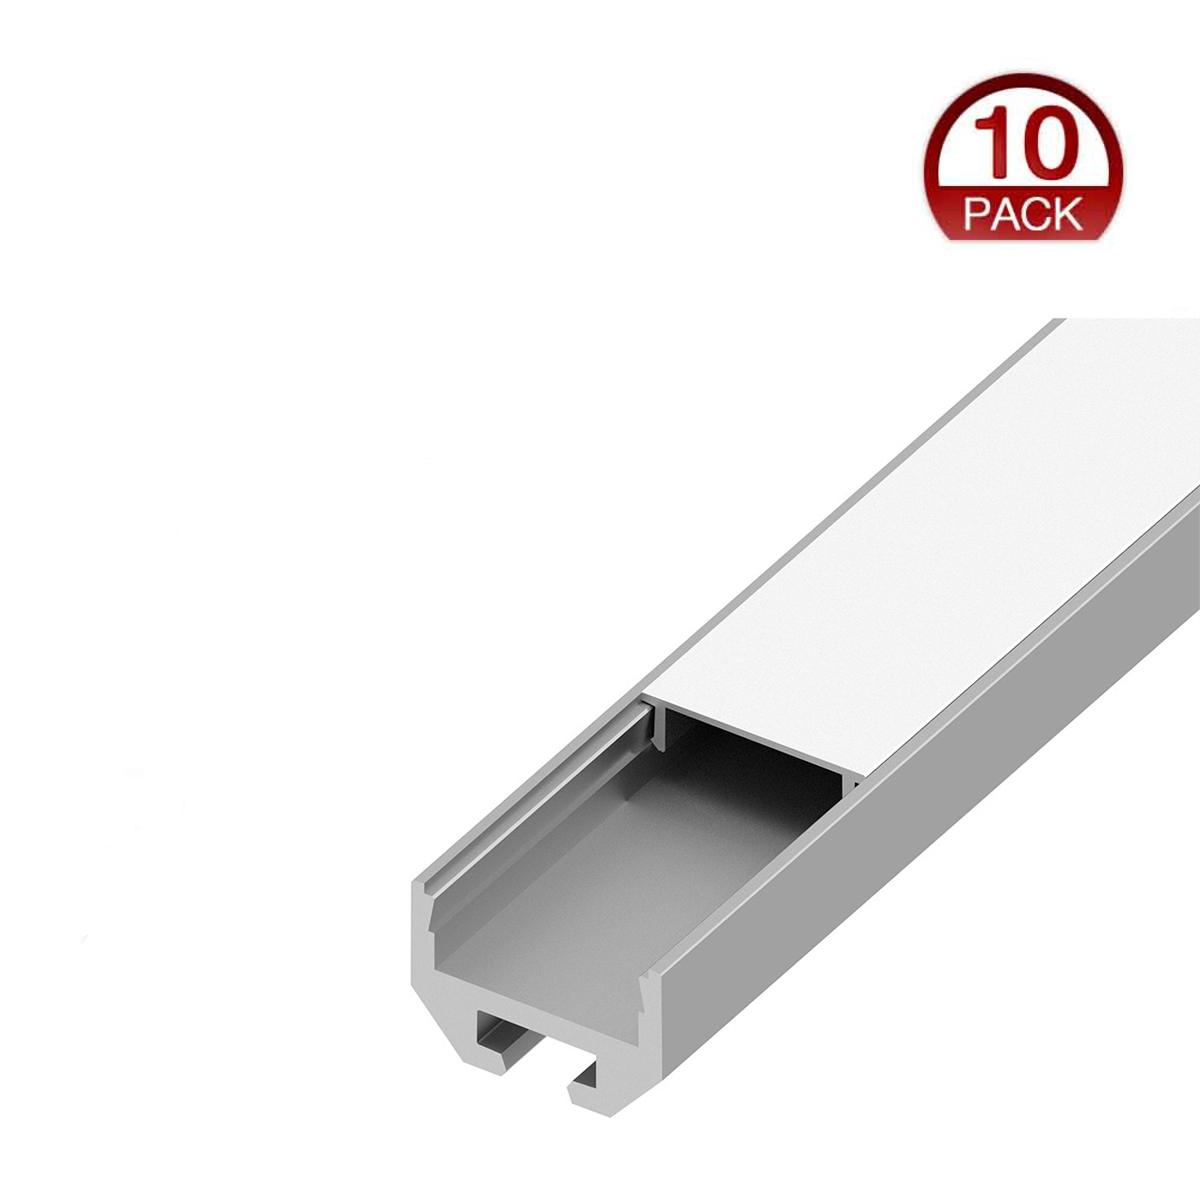 96in. Chromapath Builder, Square LED Aluminum Channels for 12mm strip lights, Pack of 10